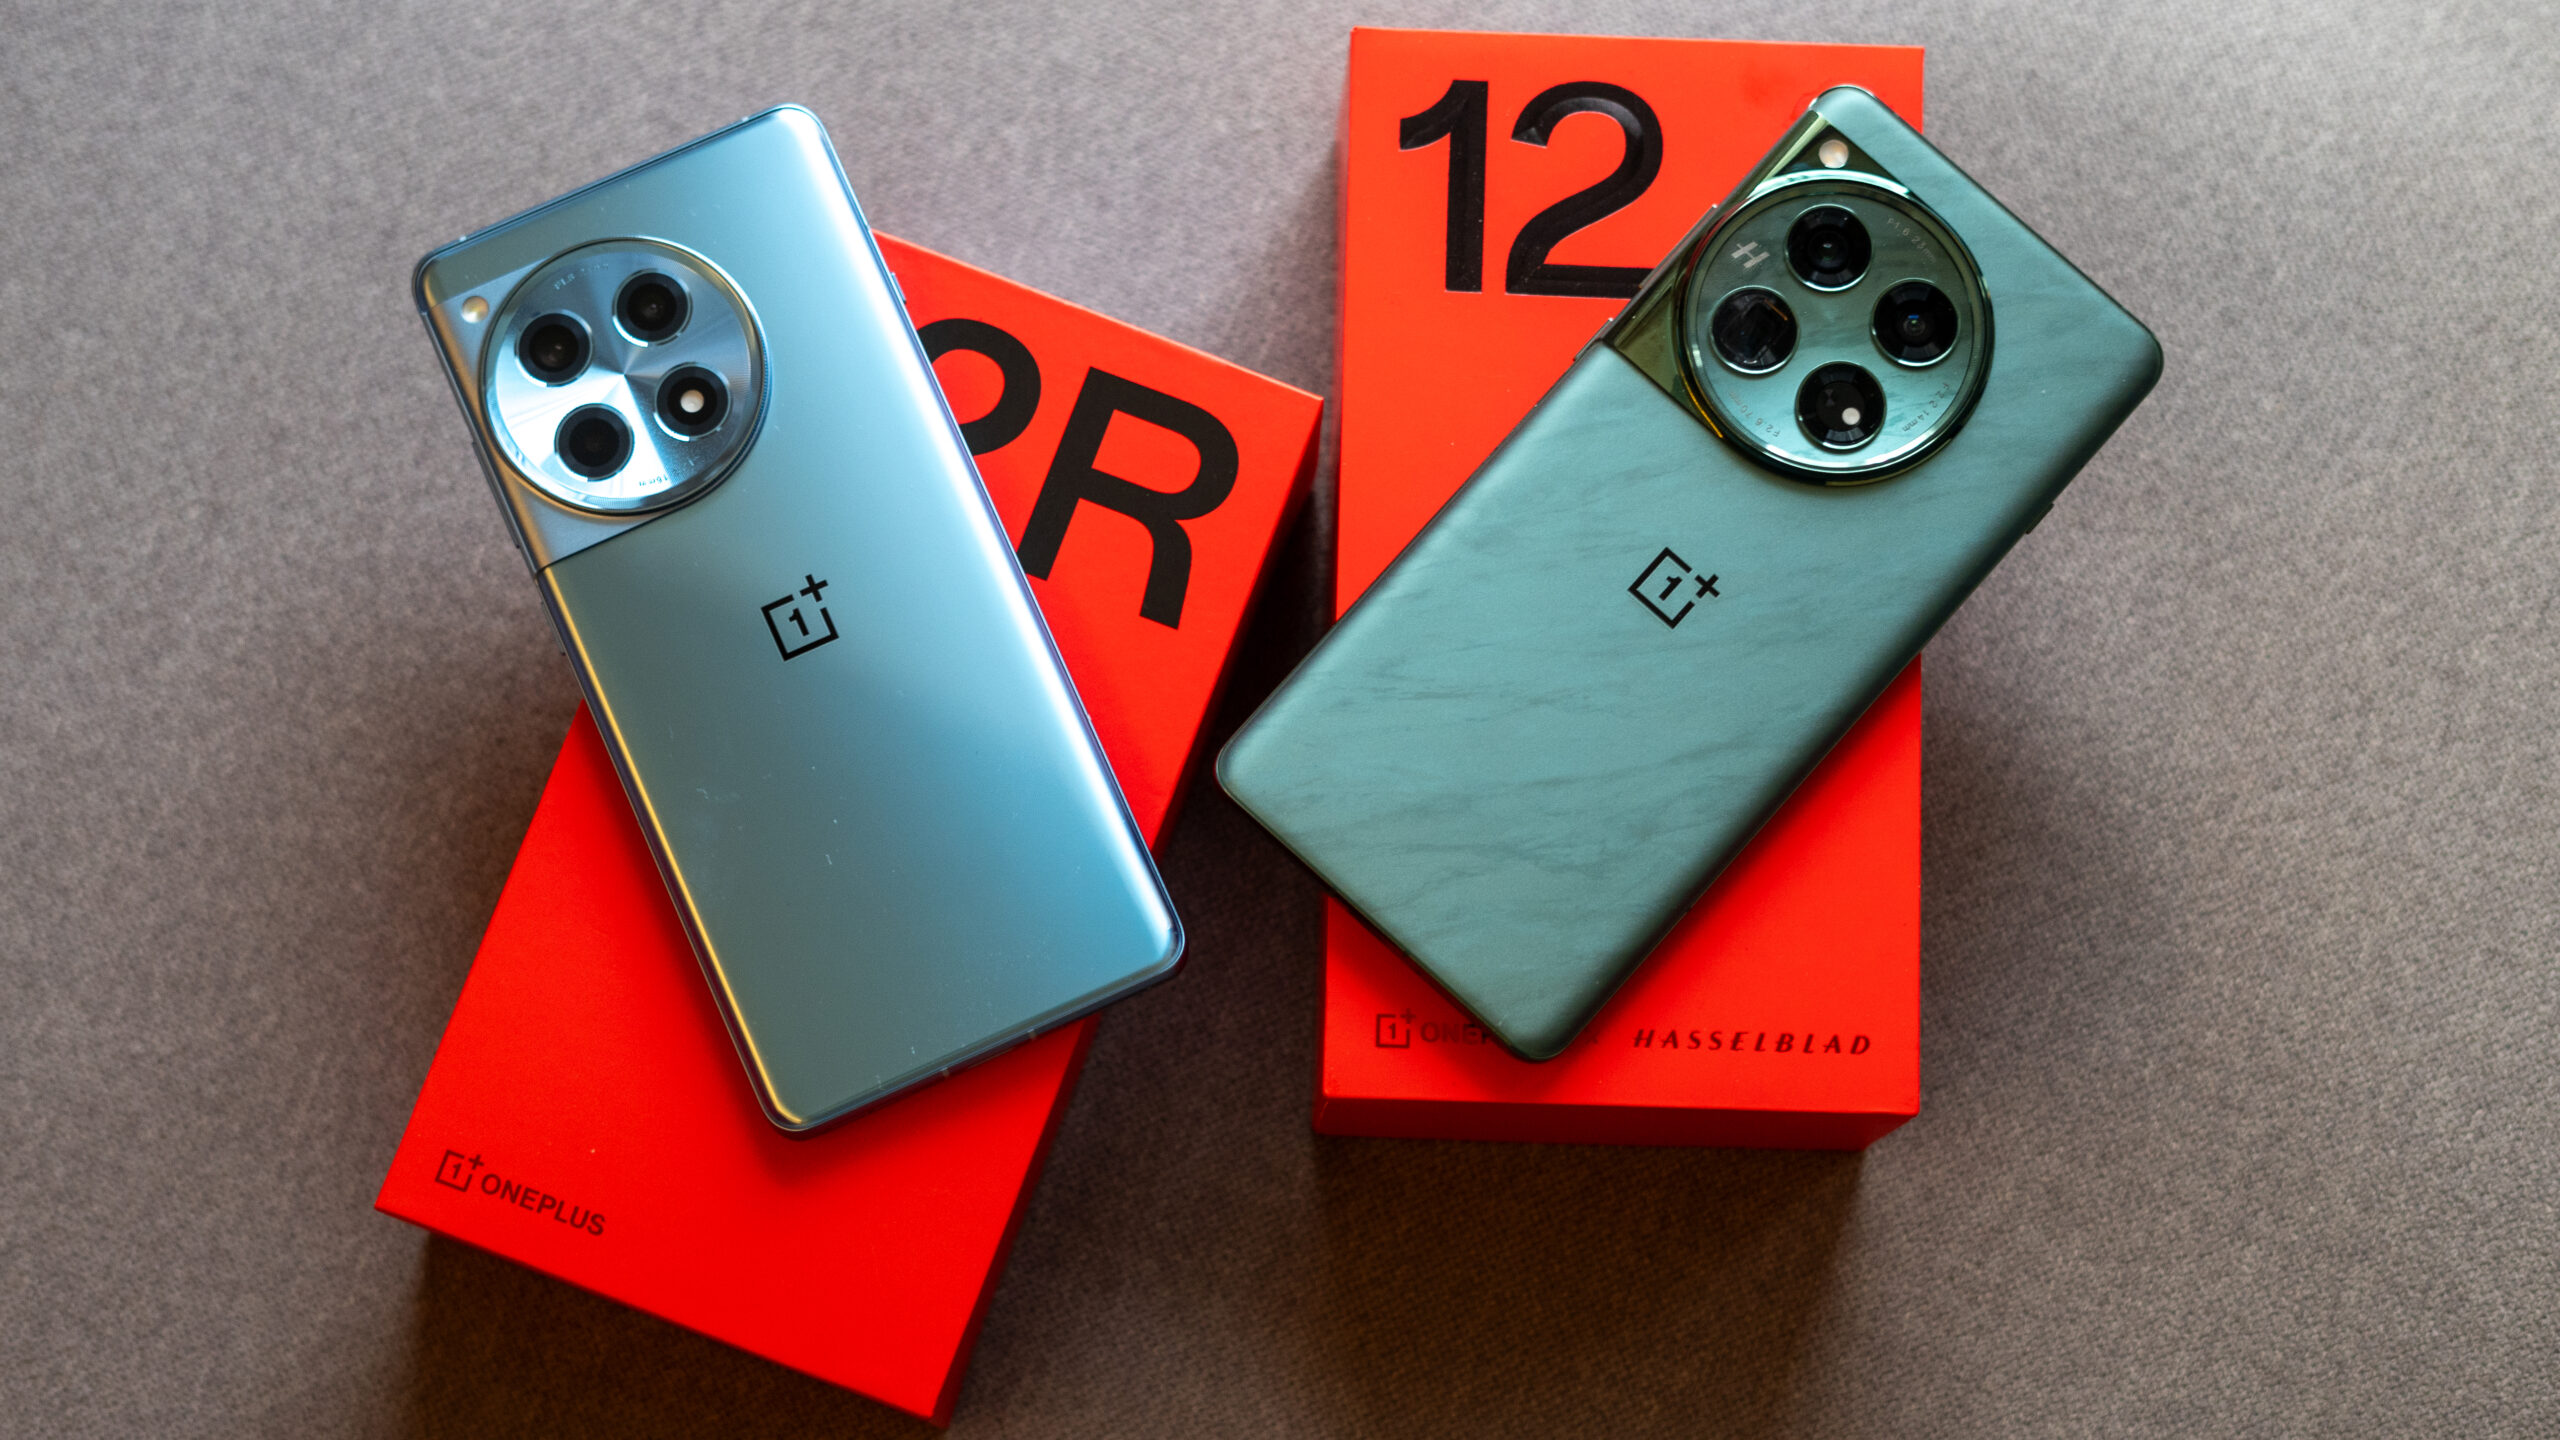 Top down view of OnePlus 12 and OnePlus 12R